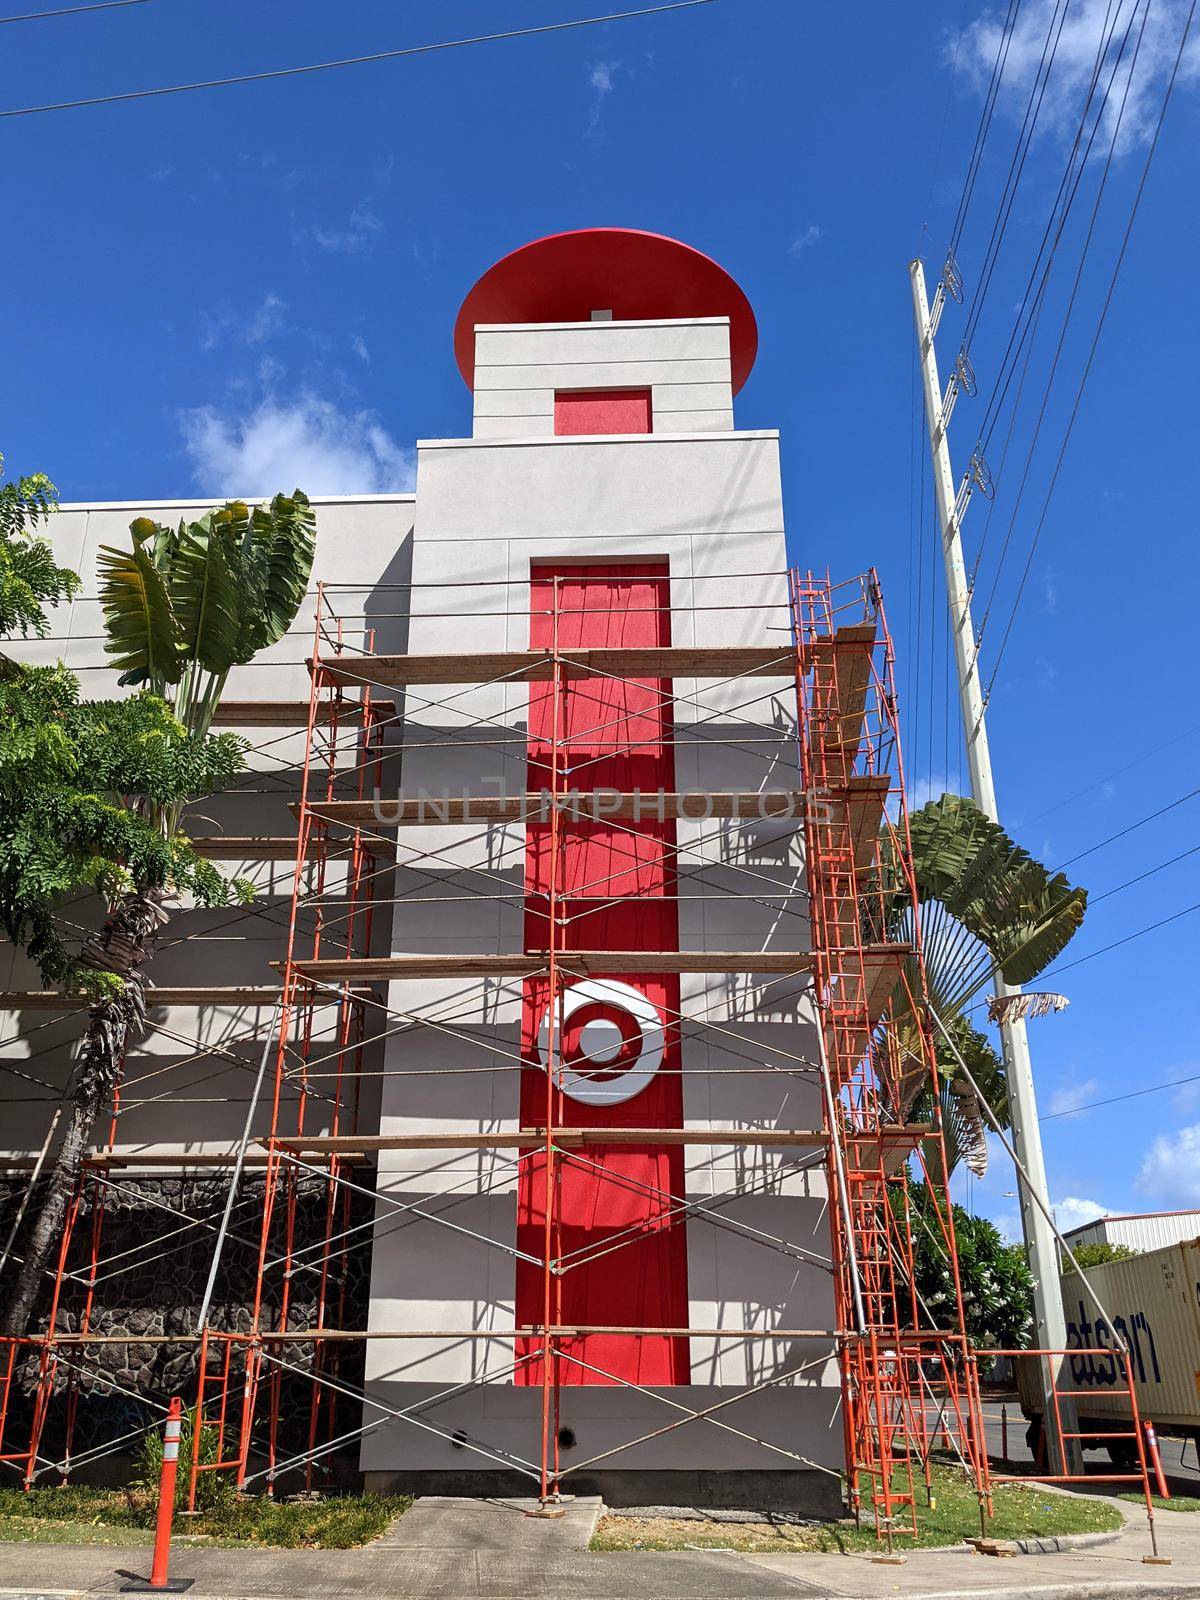 Honolulu - August 1, 2021: Target store under repair with scoffolding on side of building.